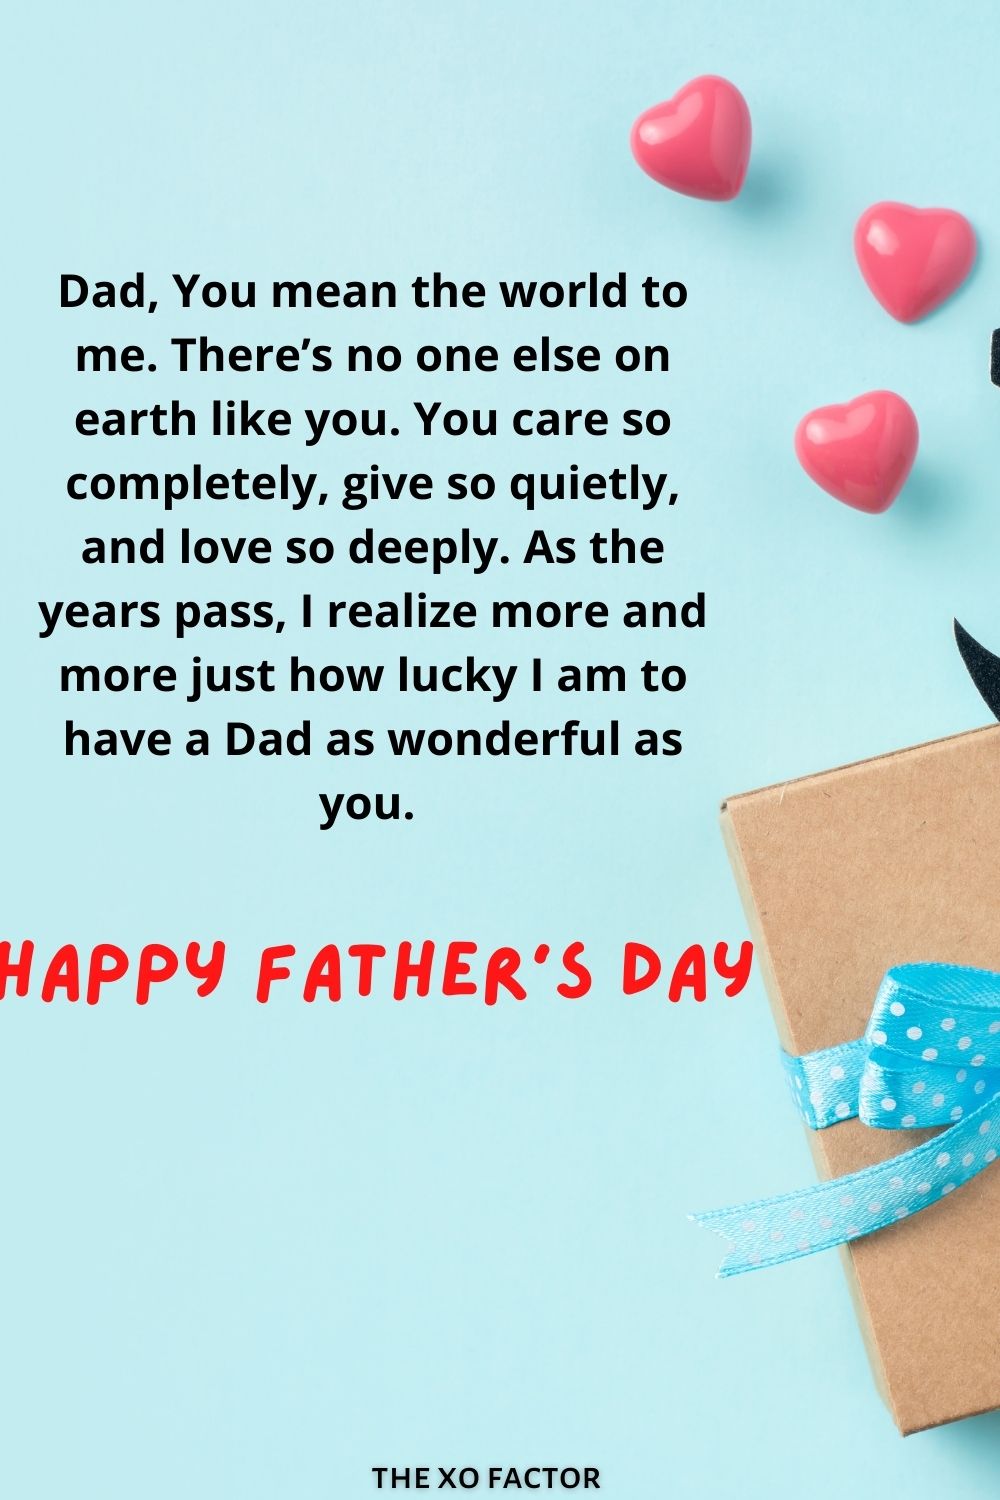 Dad, You mean the world to me. There’s no one else on earth like you. You care so completely, give so quietly, and love so deeply. As the years pass, I realize more and more just how lucky I am to have a Dad as wonderful as you. Happy father’s day!